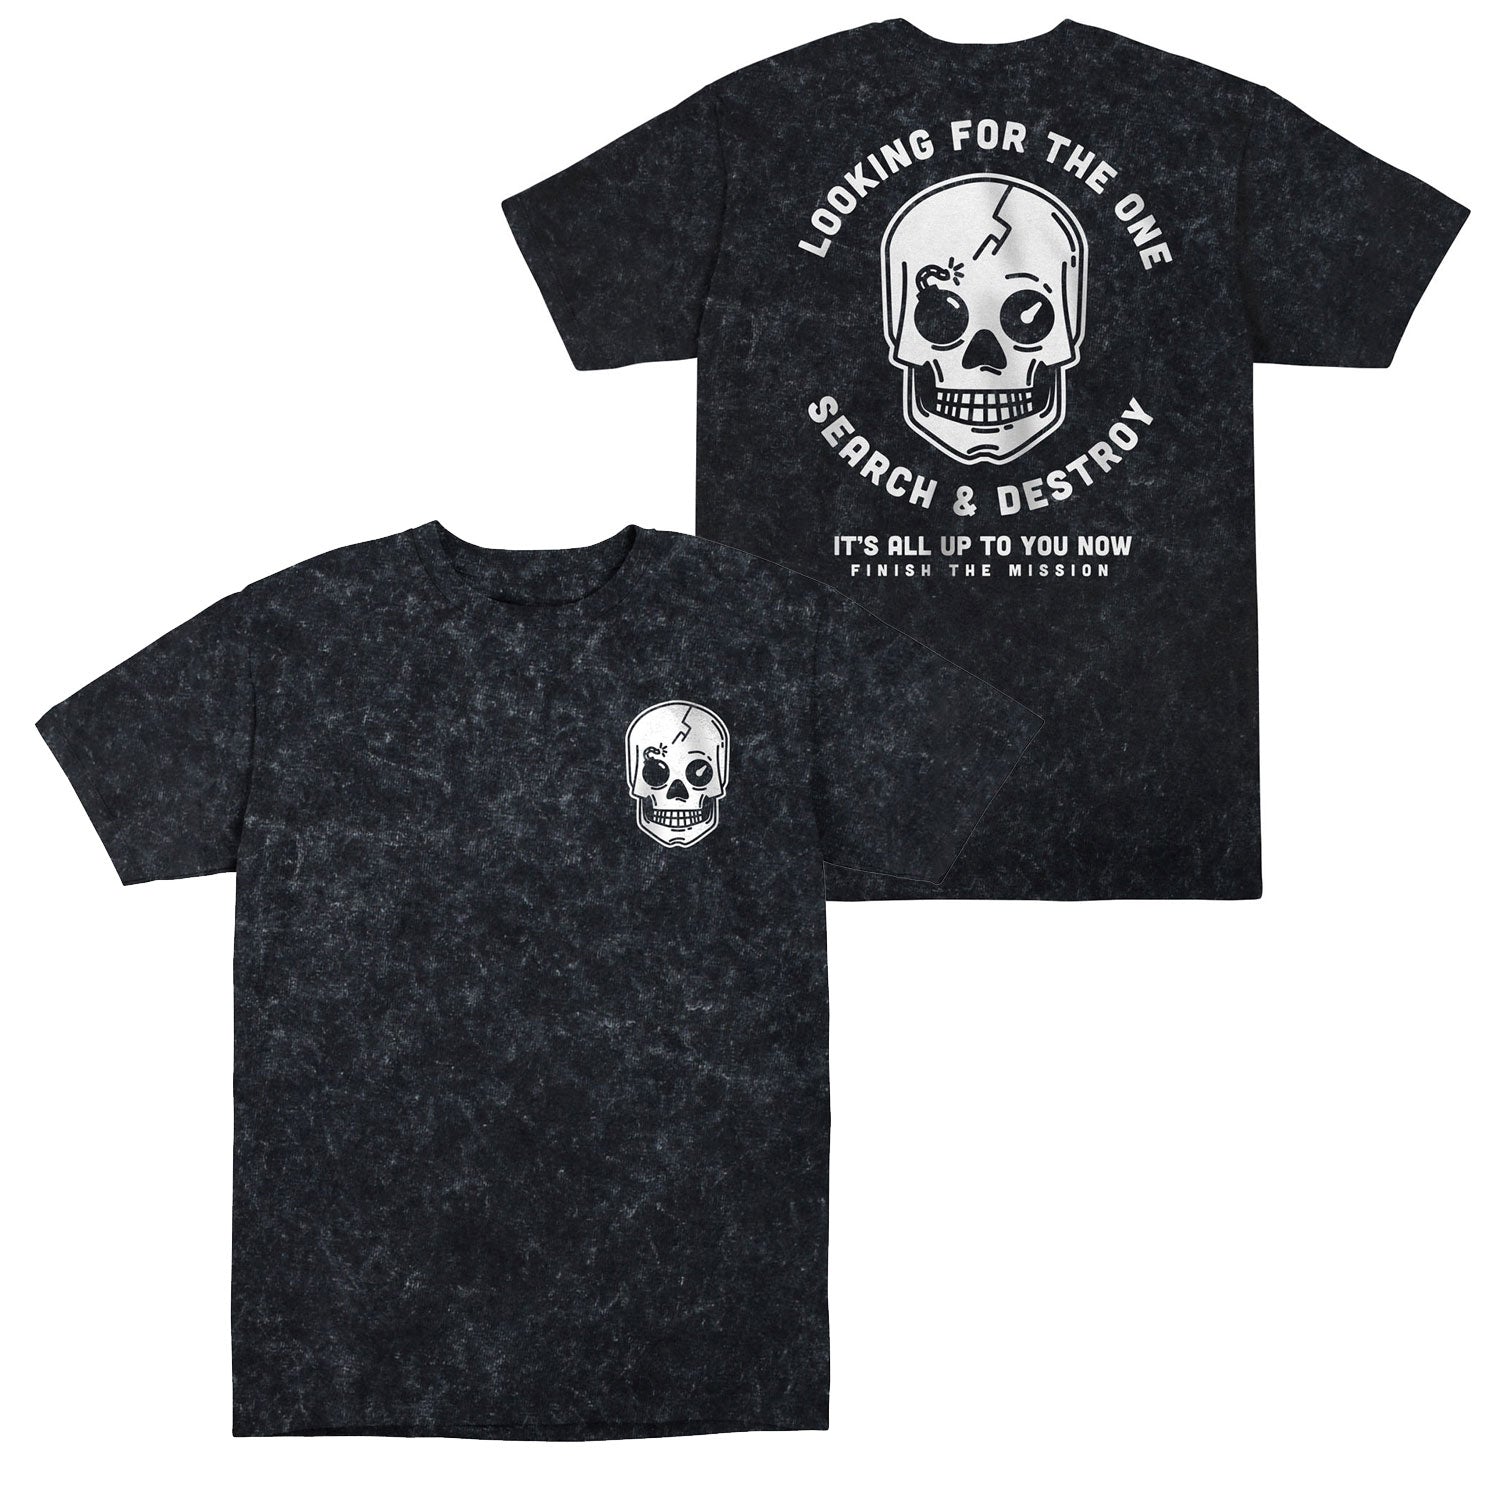 Call of Duty Search & Destroy Skull Logo Acid Black T-Shirt - front and back views